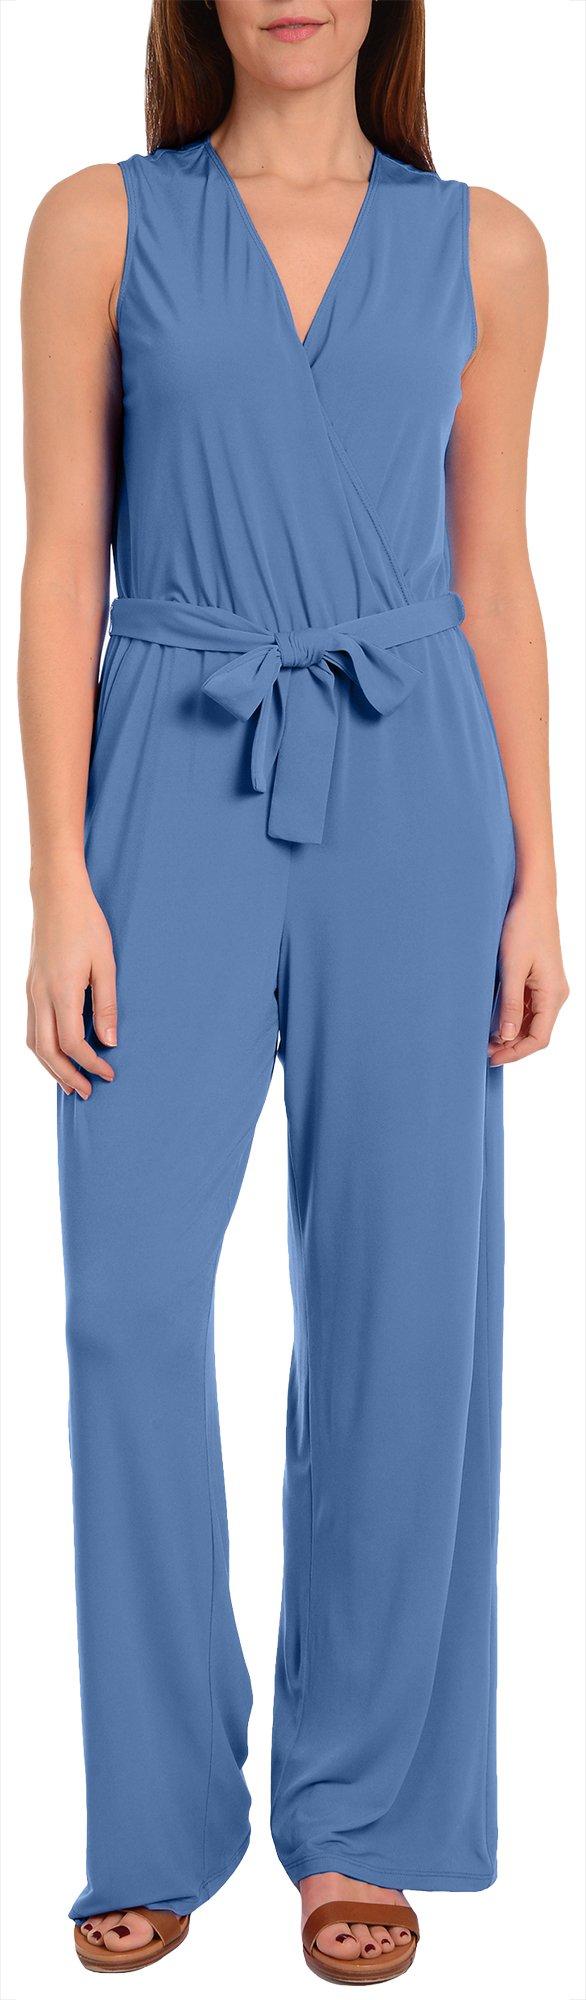 NY Collection Petite Belted Sleeveless Solid Jumpsuit | Bealls Florida